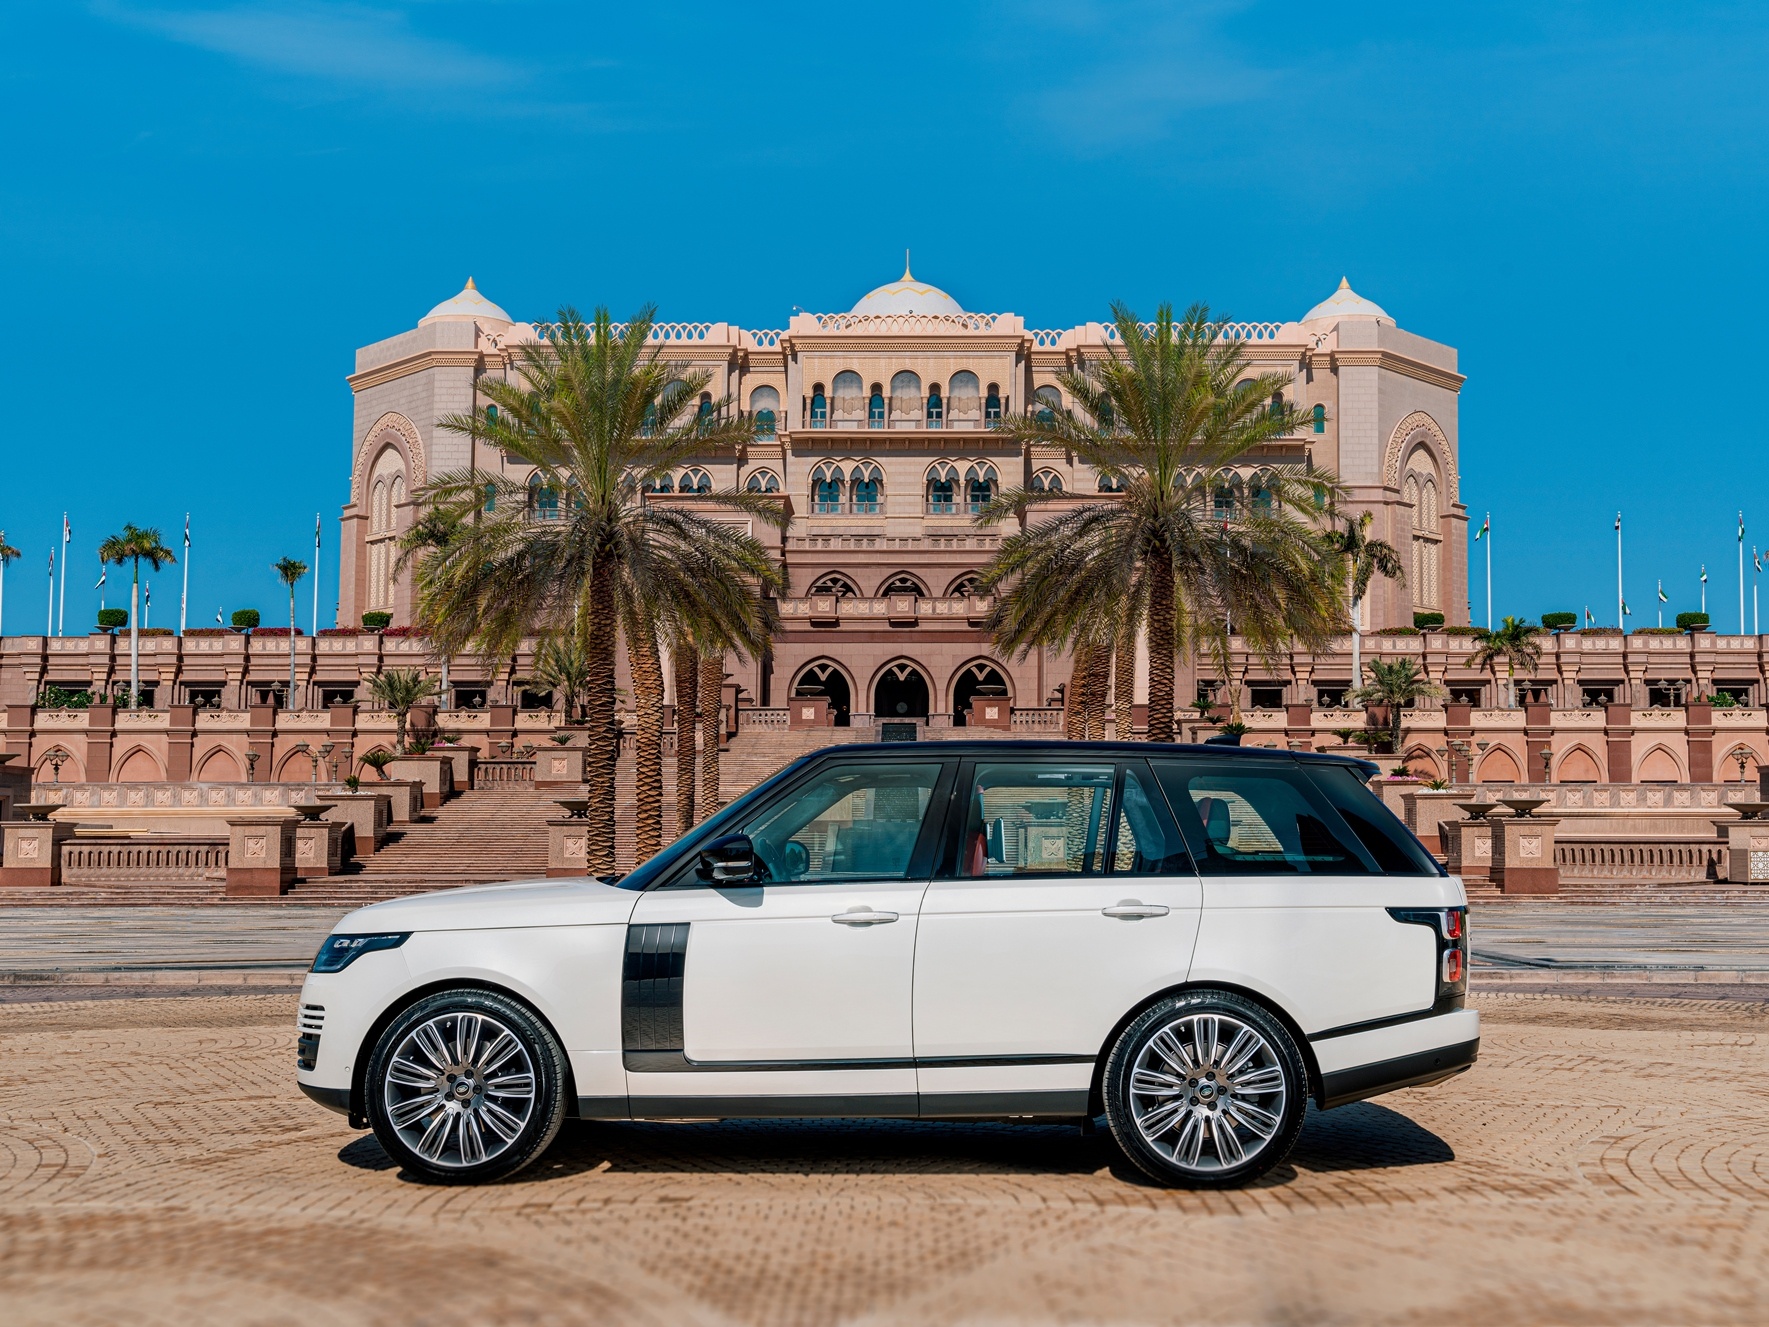 Special Edition 2021 Range Rover Vogue Vehicles celebrating 50 Years of the Union arrive in UAE